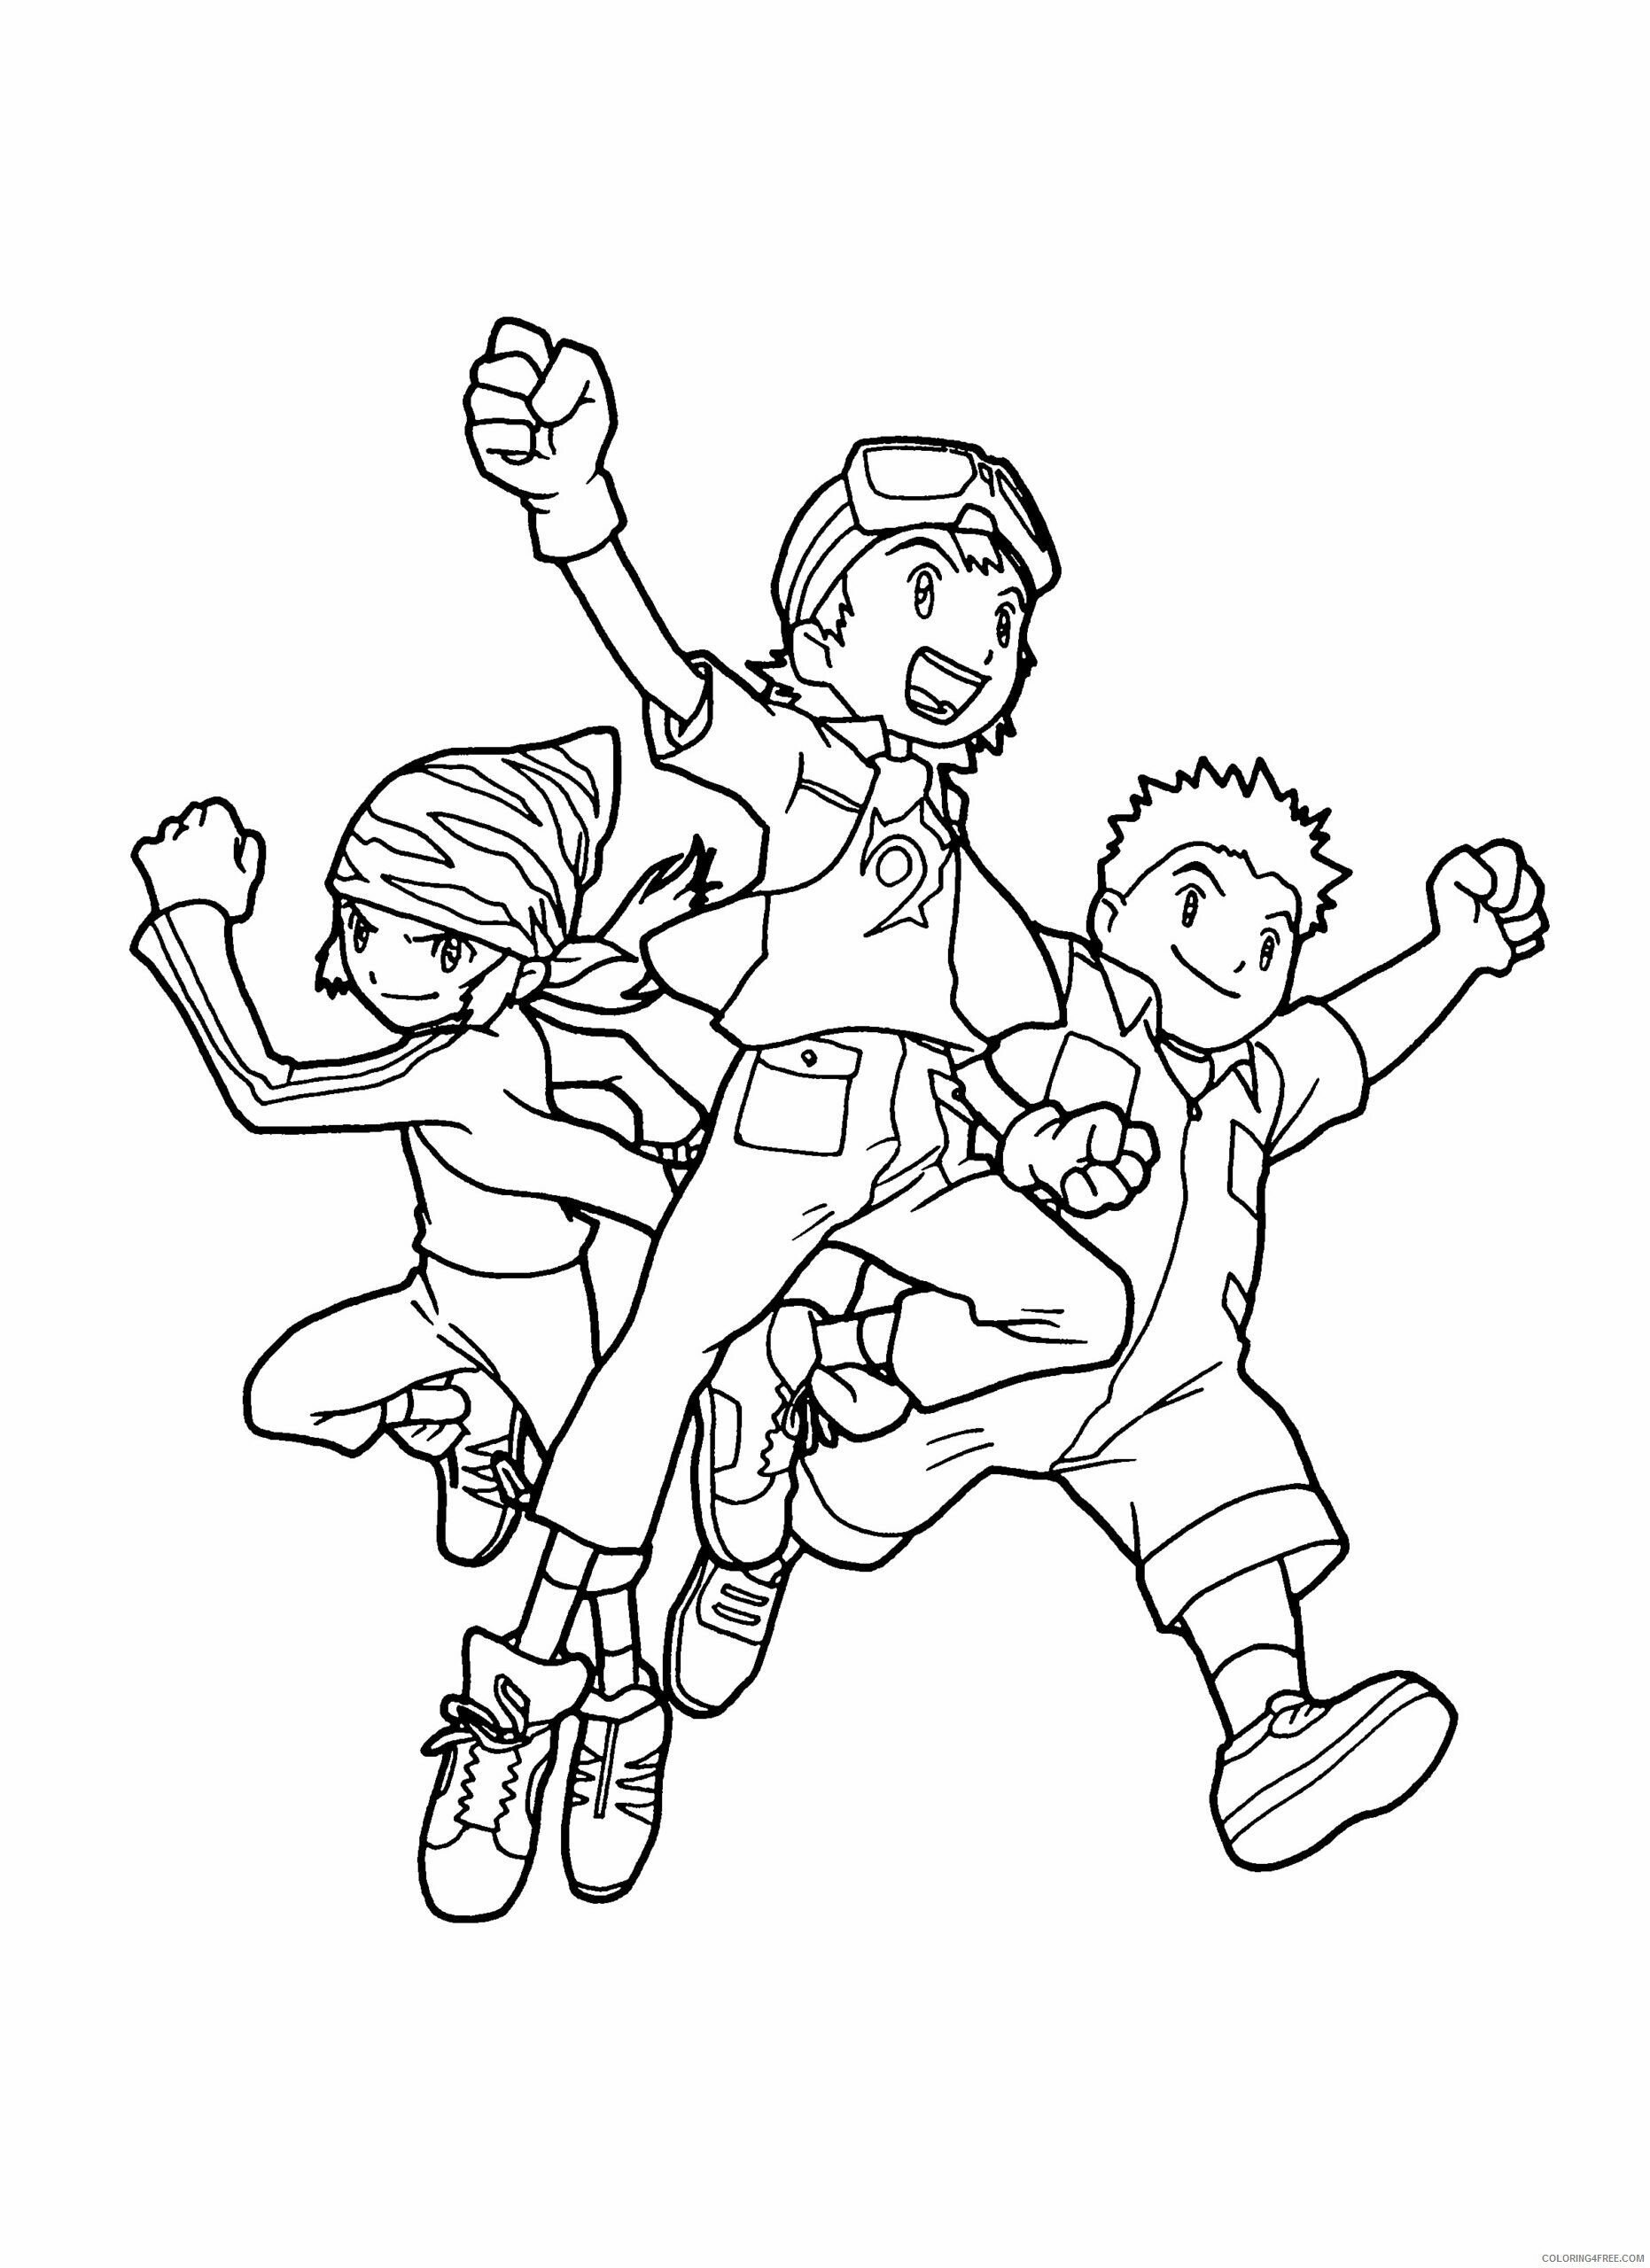 Digimon Printable Coloring Pages Anime digimon 63 2021 0359 Coloring4free